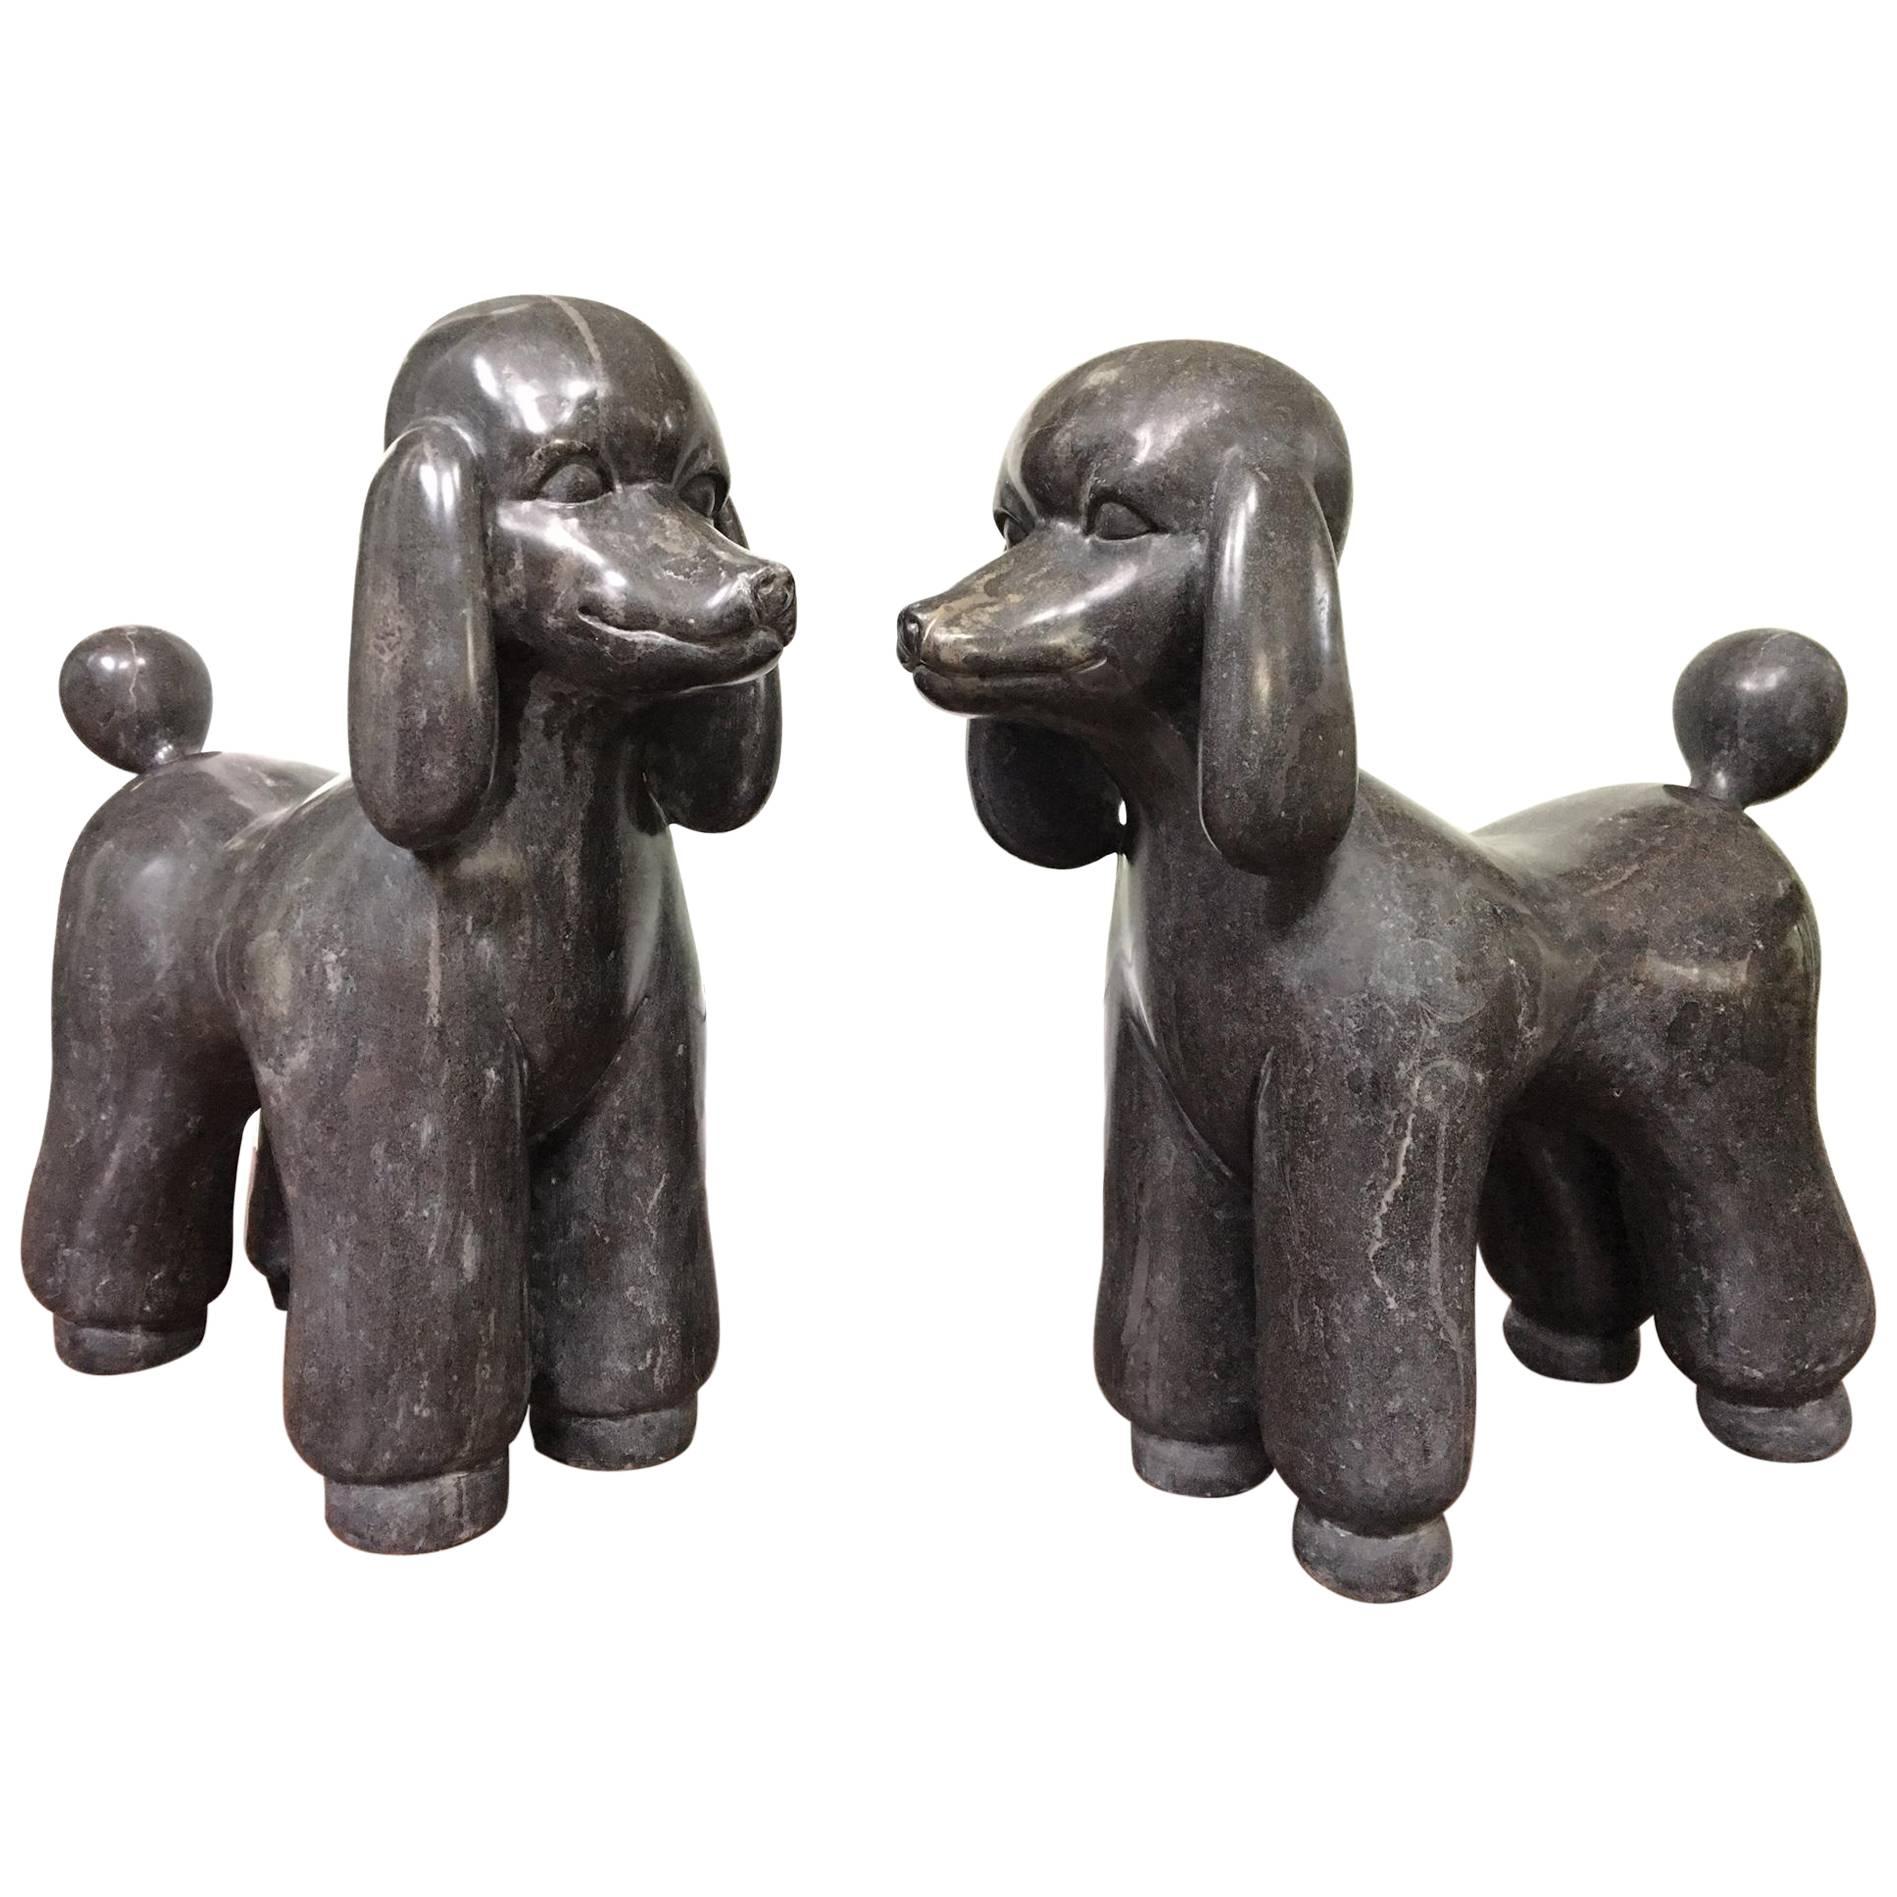 Large Italian Solid Marble Poodle Statues